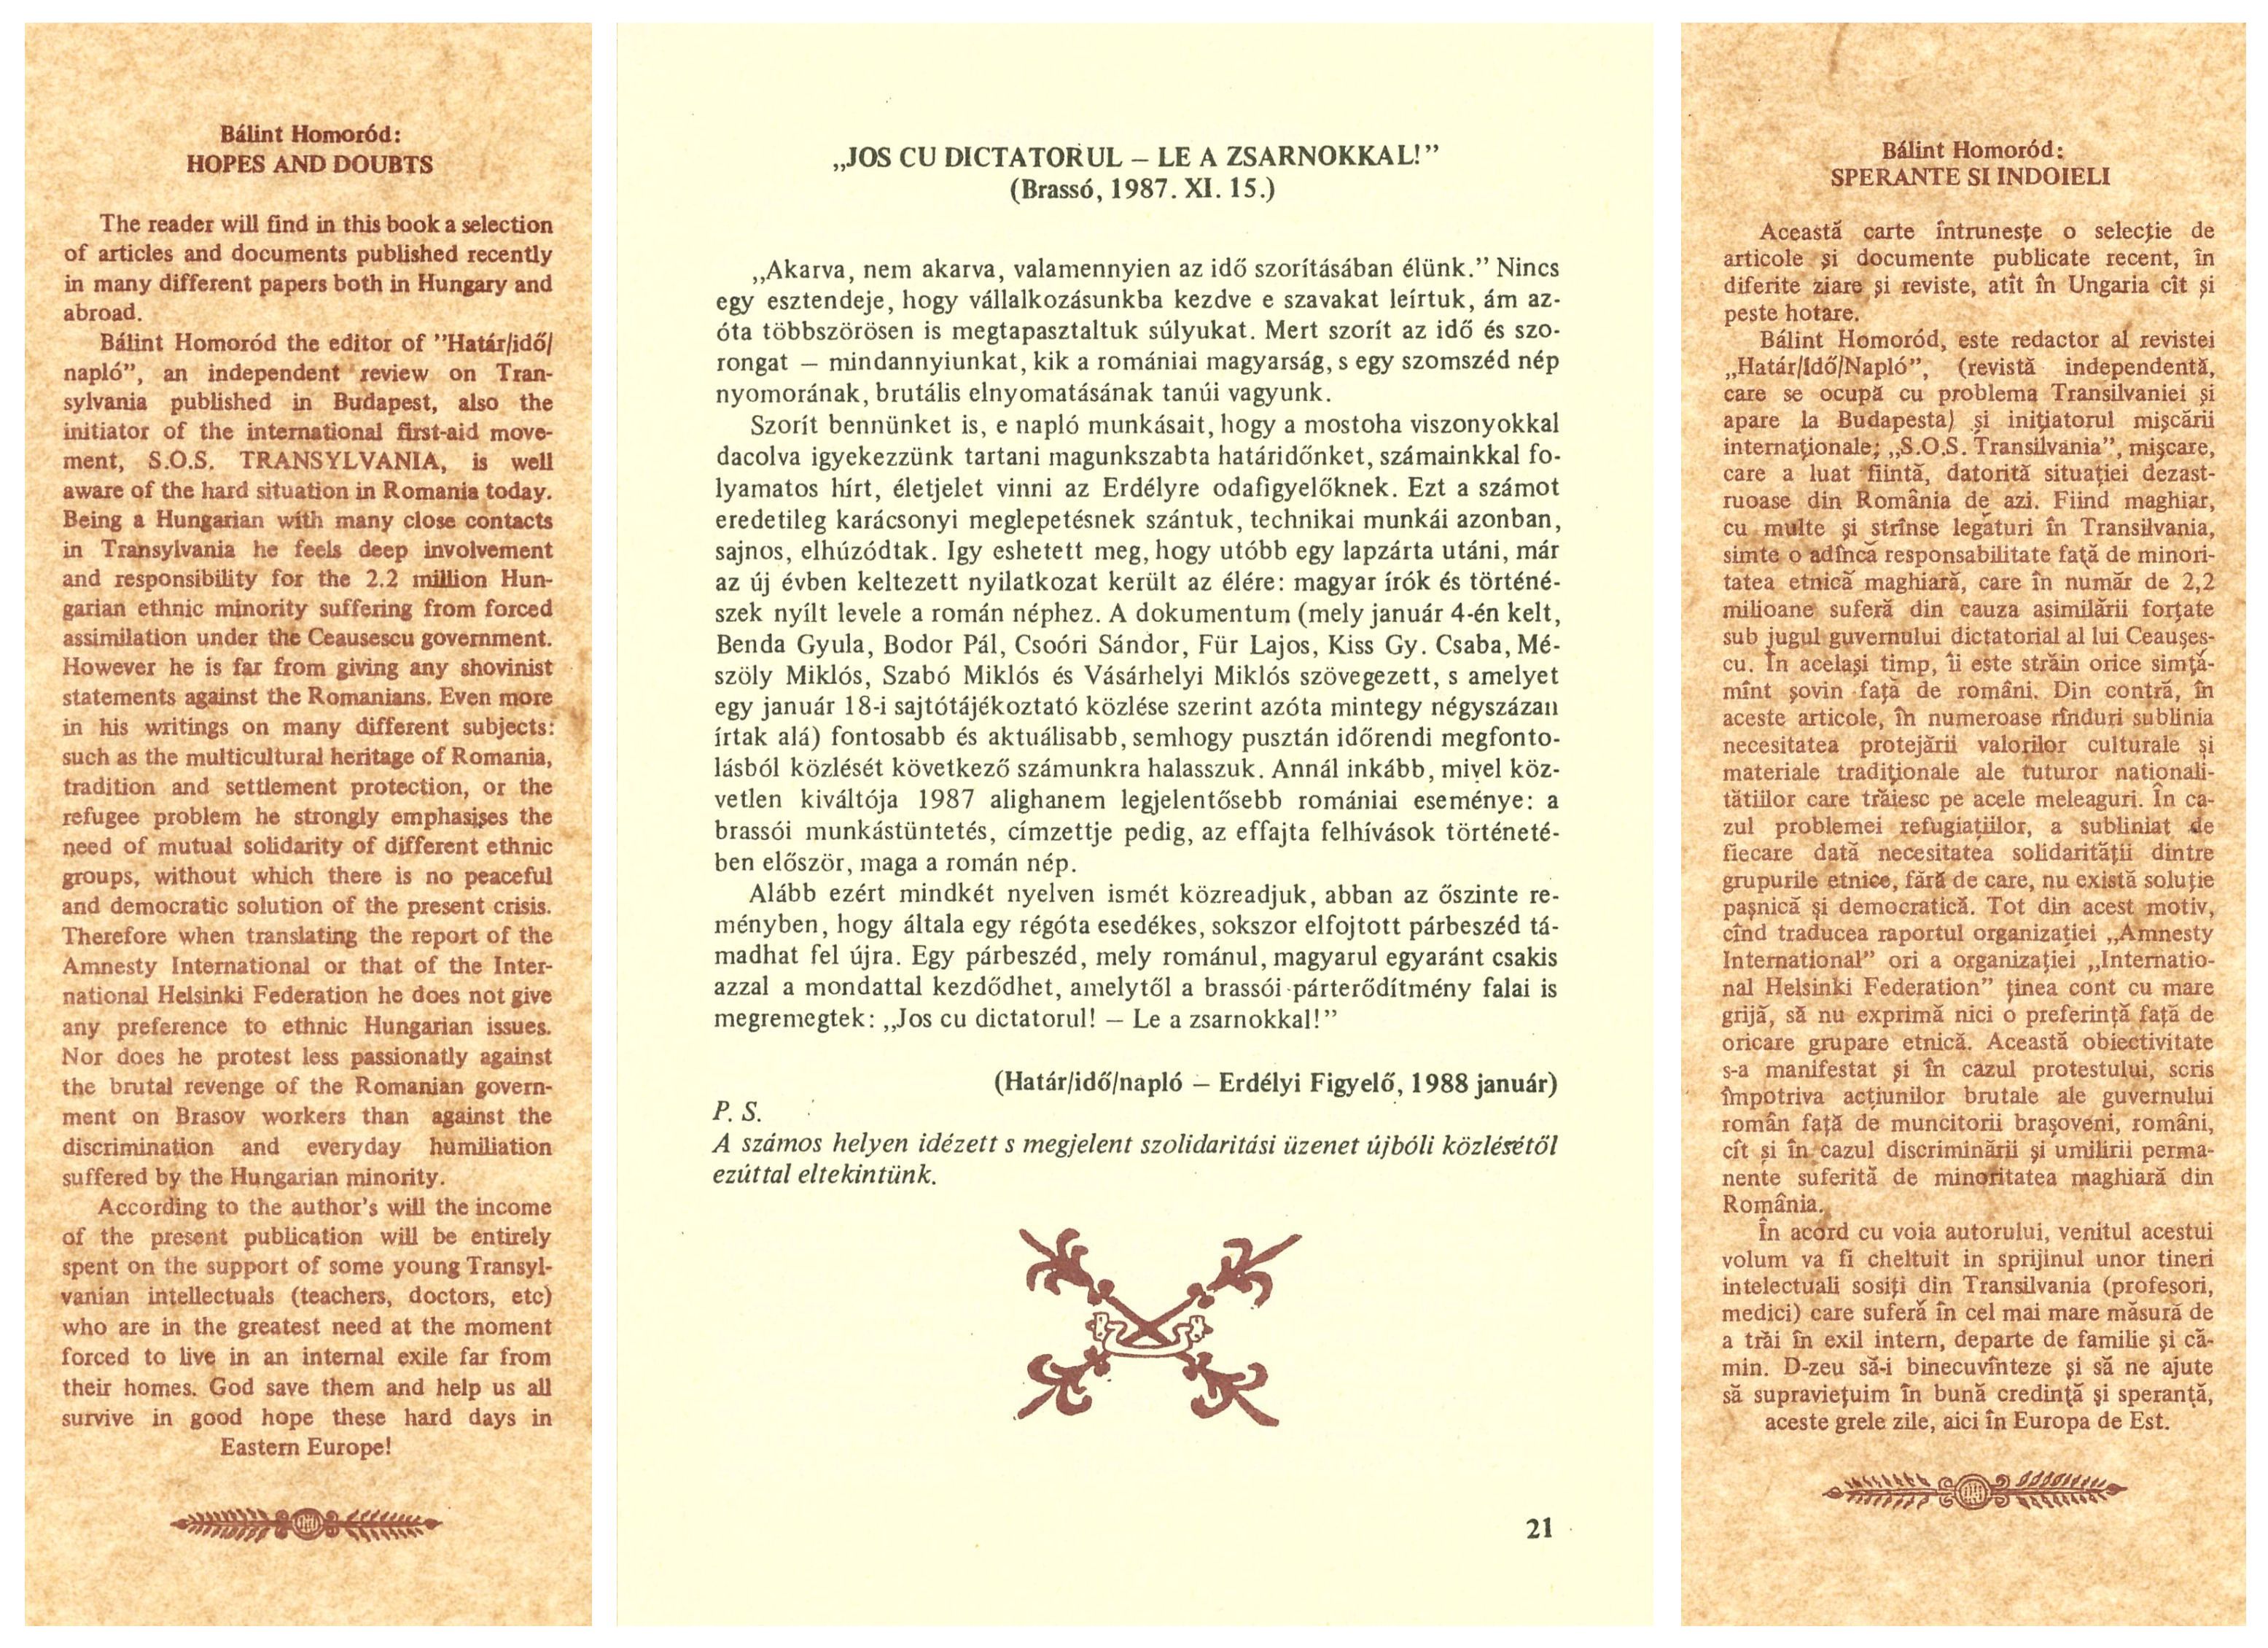 One page of the book Hopes and Doubts with a call for solidarity with the Brassov workers revolted against Ceausescu's regime in mid-November 1987 together with the English (left side) and the Romanian (right side) summaries of the samizdat book.